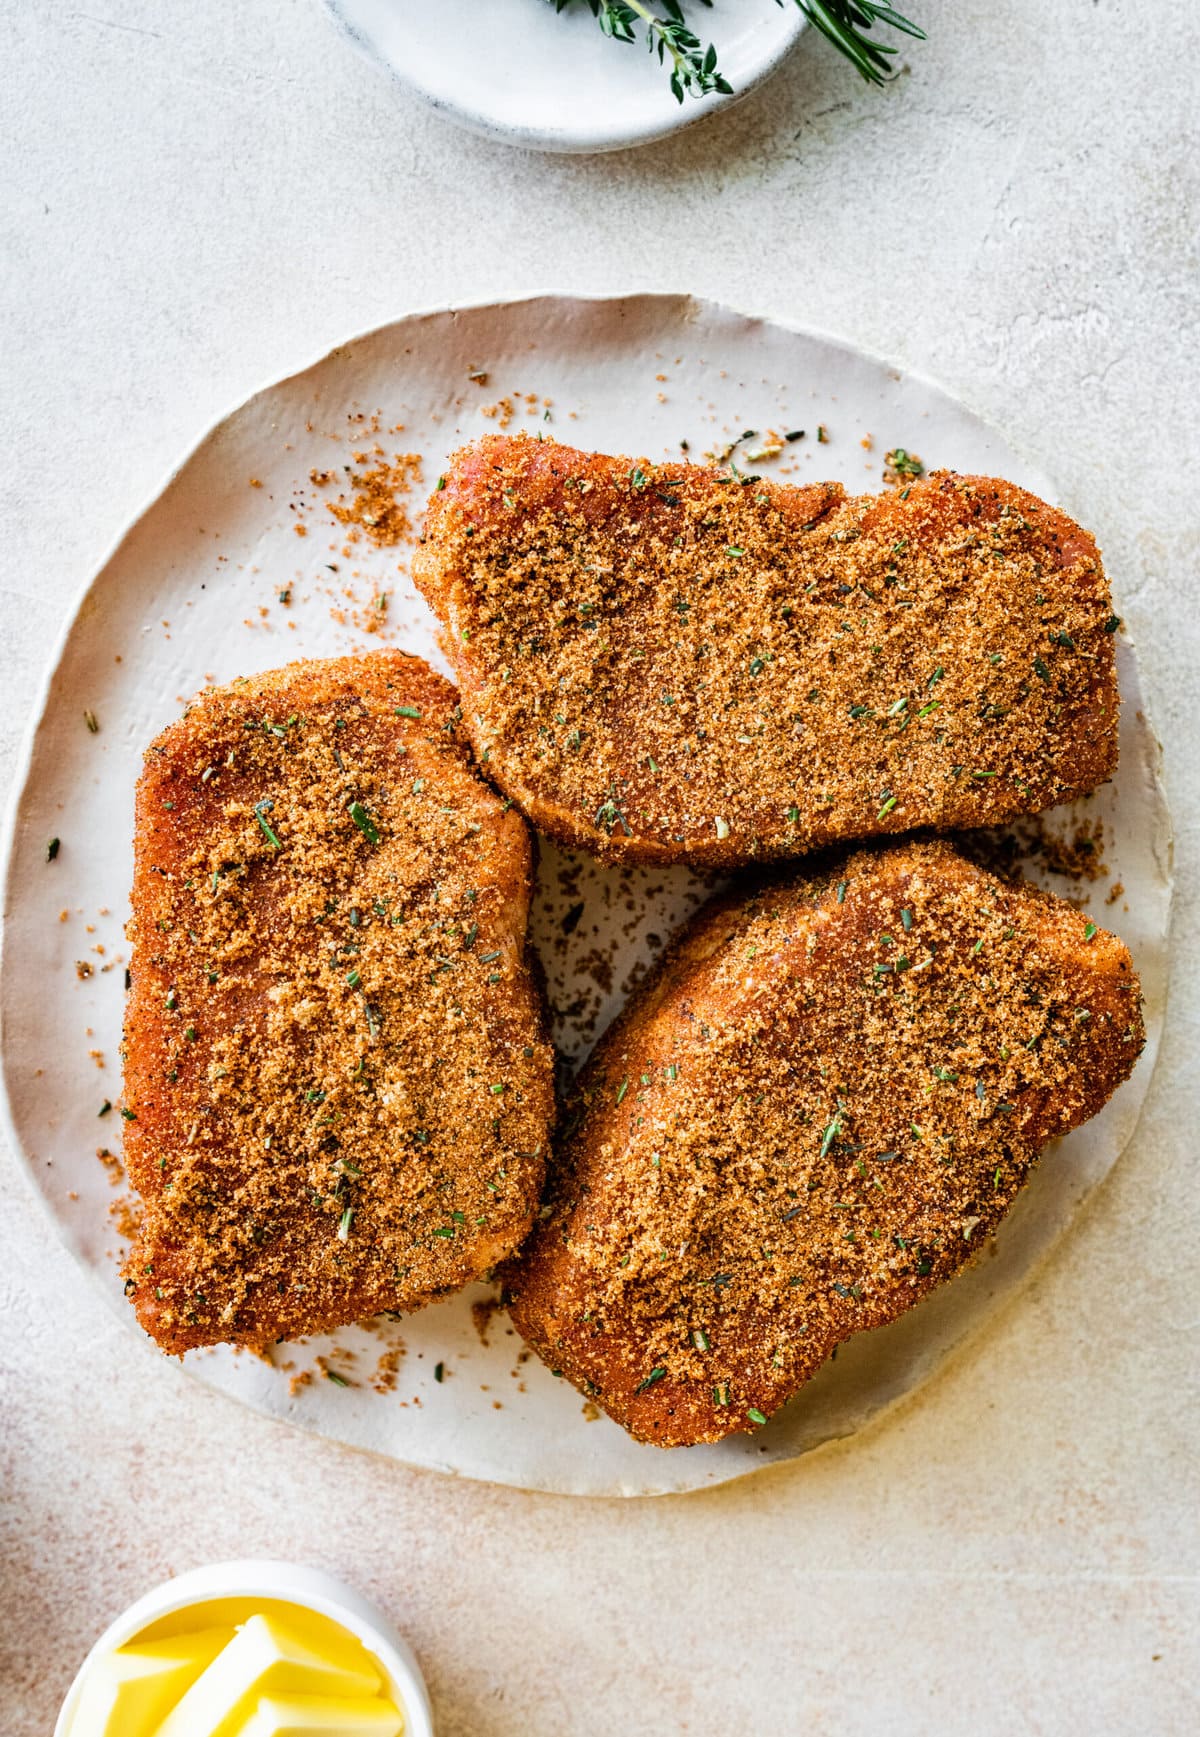 Step-by-step photos for How to cook thick pork chops- season pork chops with seasoning mix.